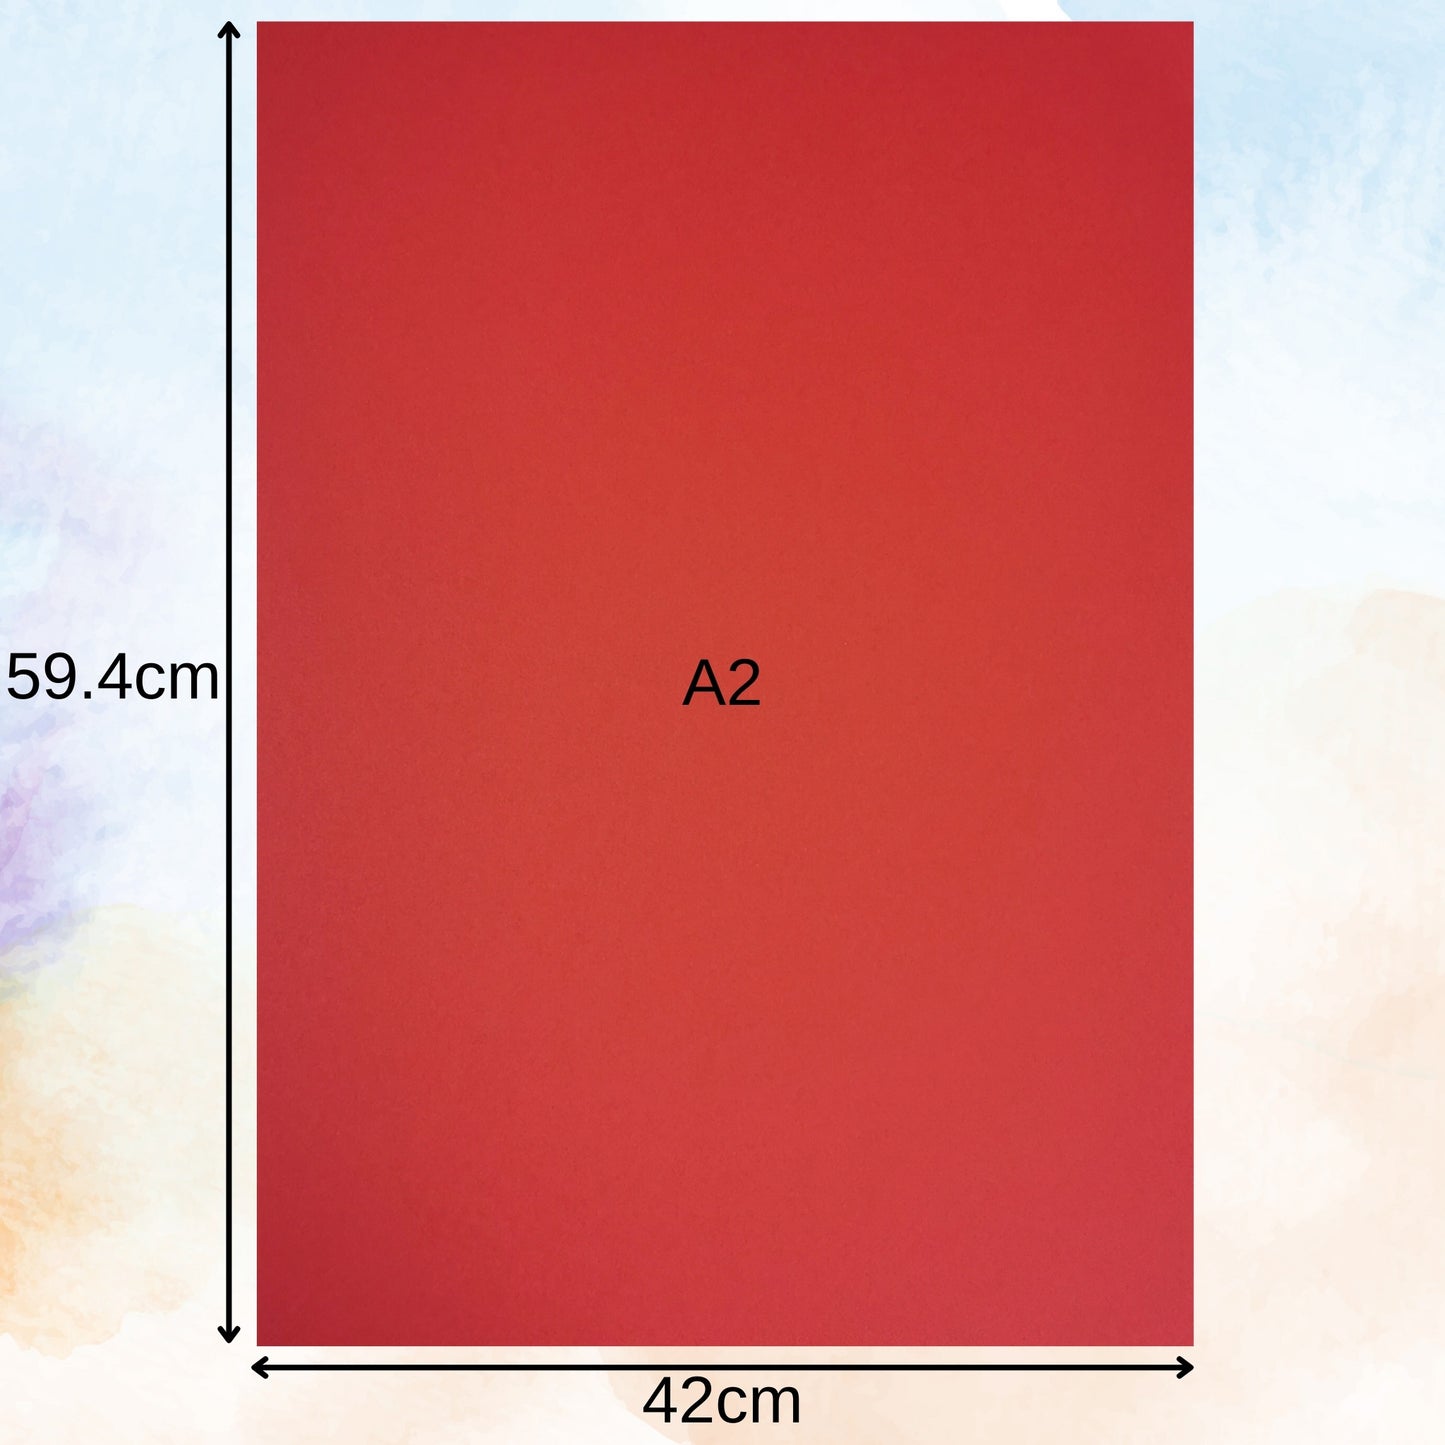 Large A2 Red Card 10 Sheets 180gsm Card Pack